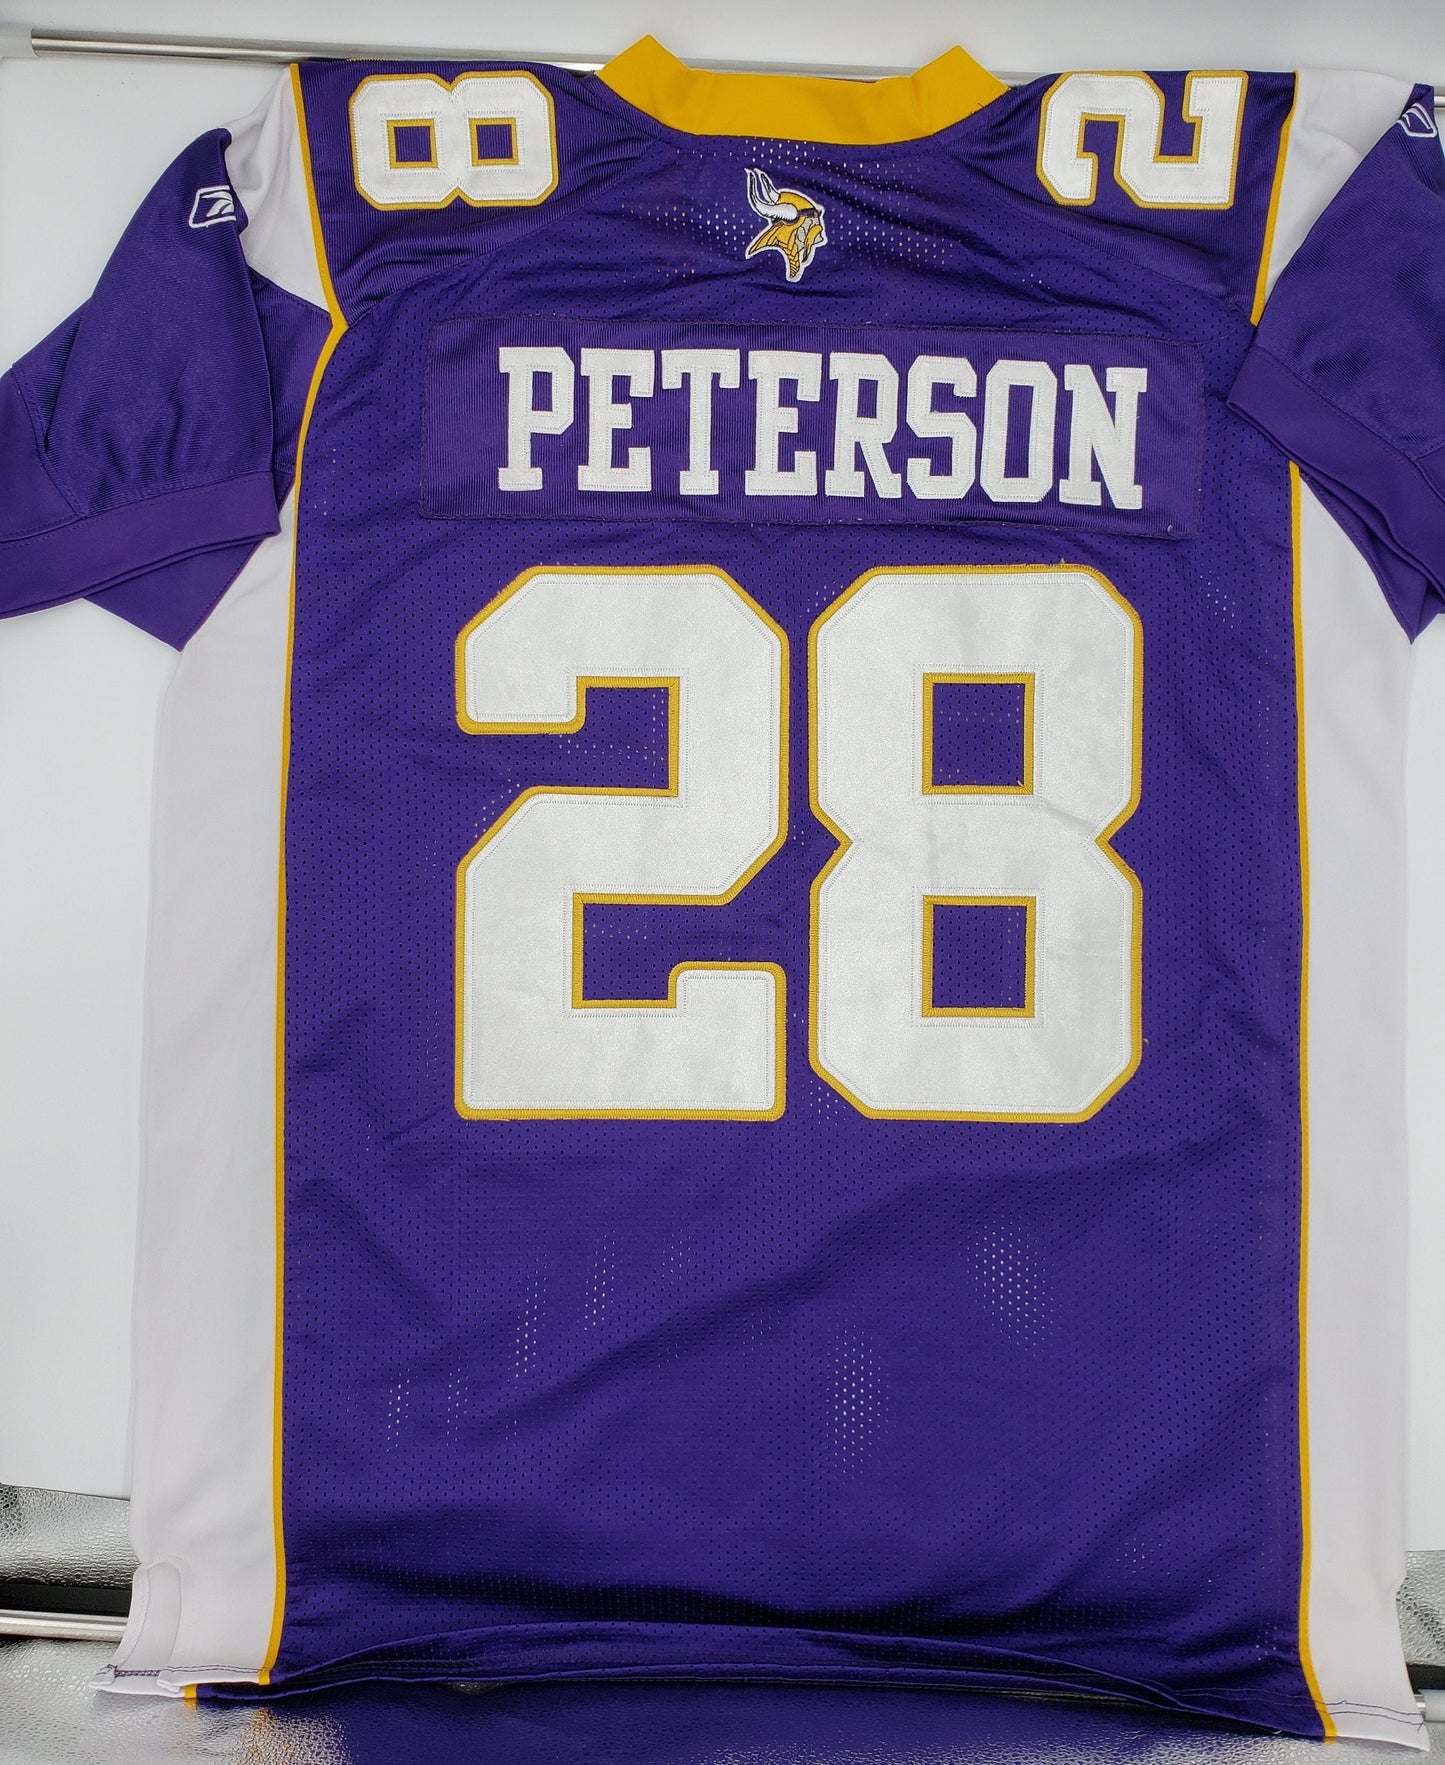 Minnesota Vikings Adrian Peterson #28 Purple Adult Size 52 XL Reebok Collectable NFL Football Jersey Perfect Birthday Gift Man Cave Decor